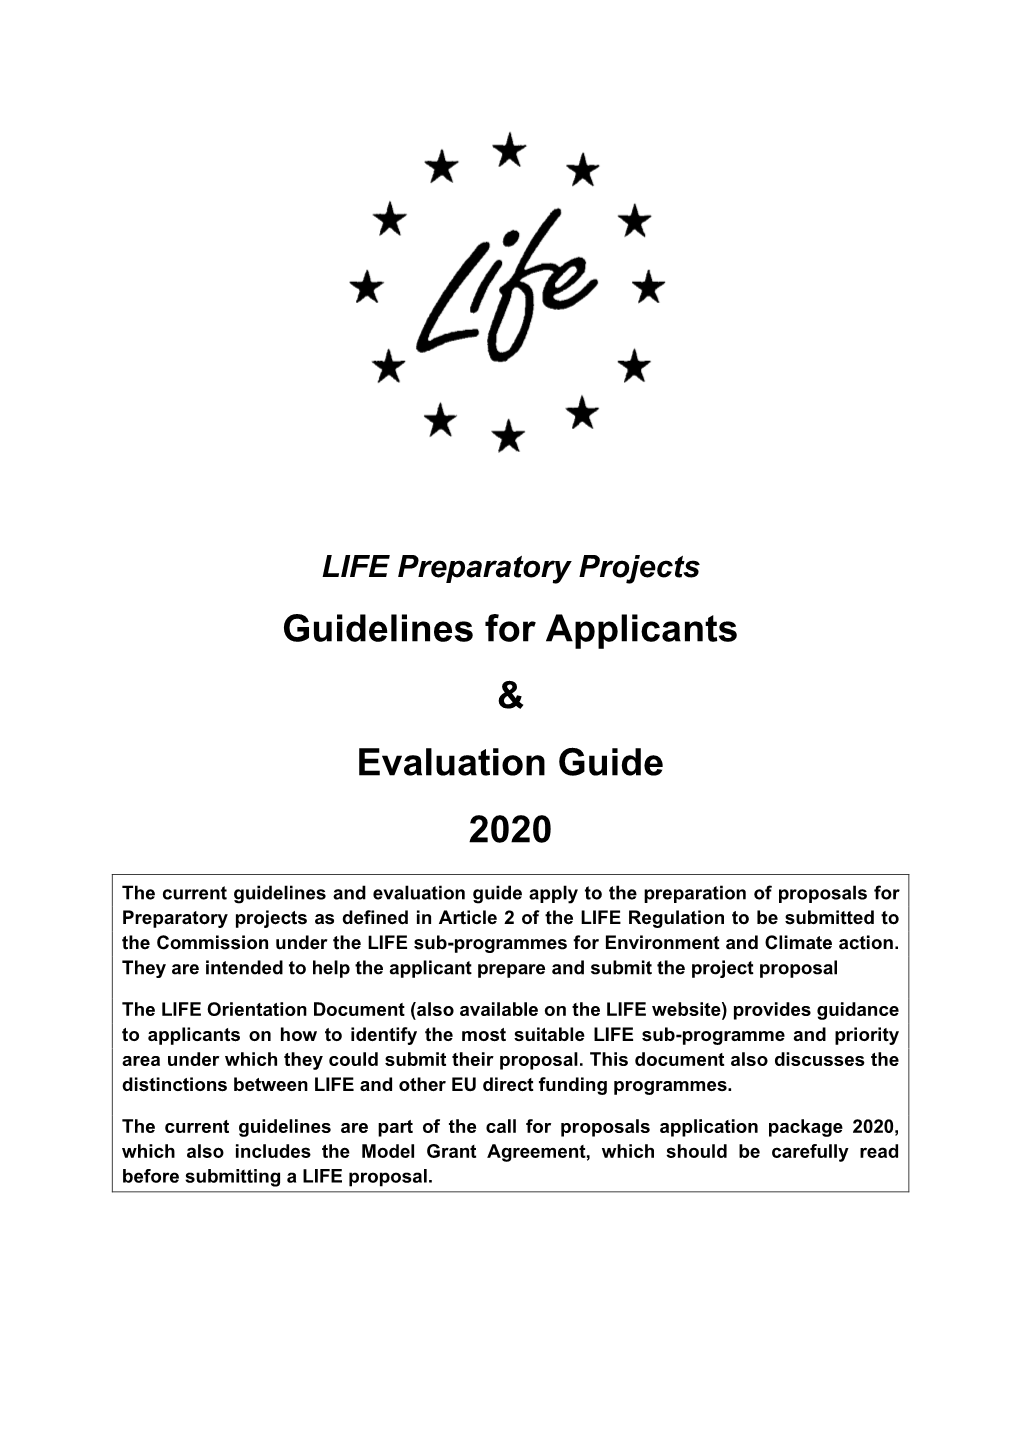 LIFE Preparatory Projects Guidelines for Applicants & Evaluation Guide 2020